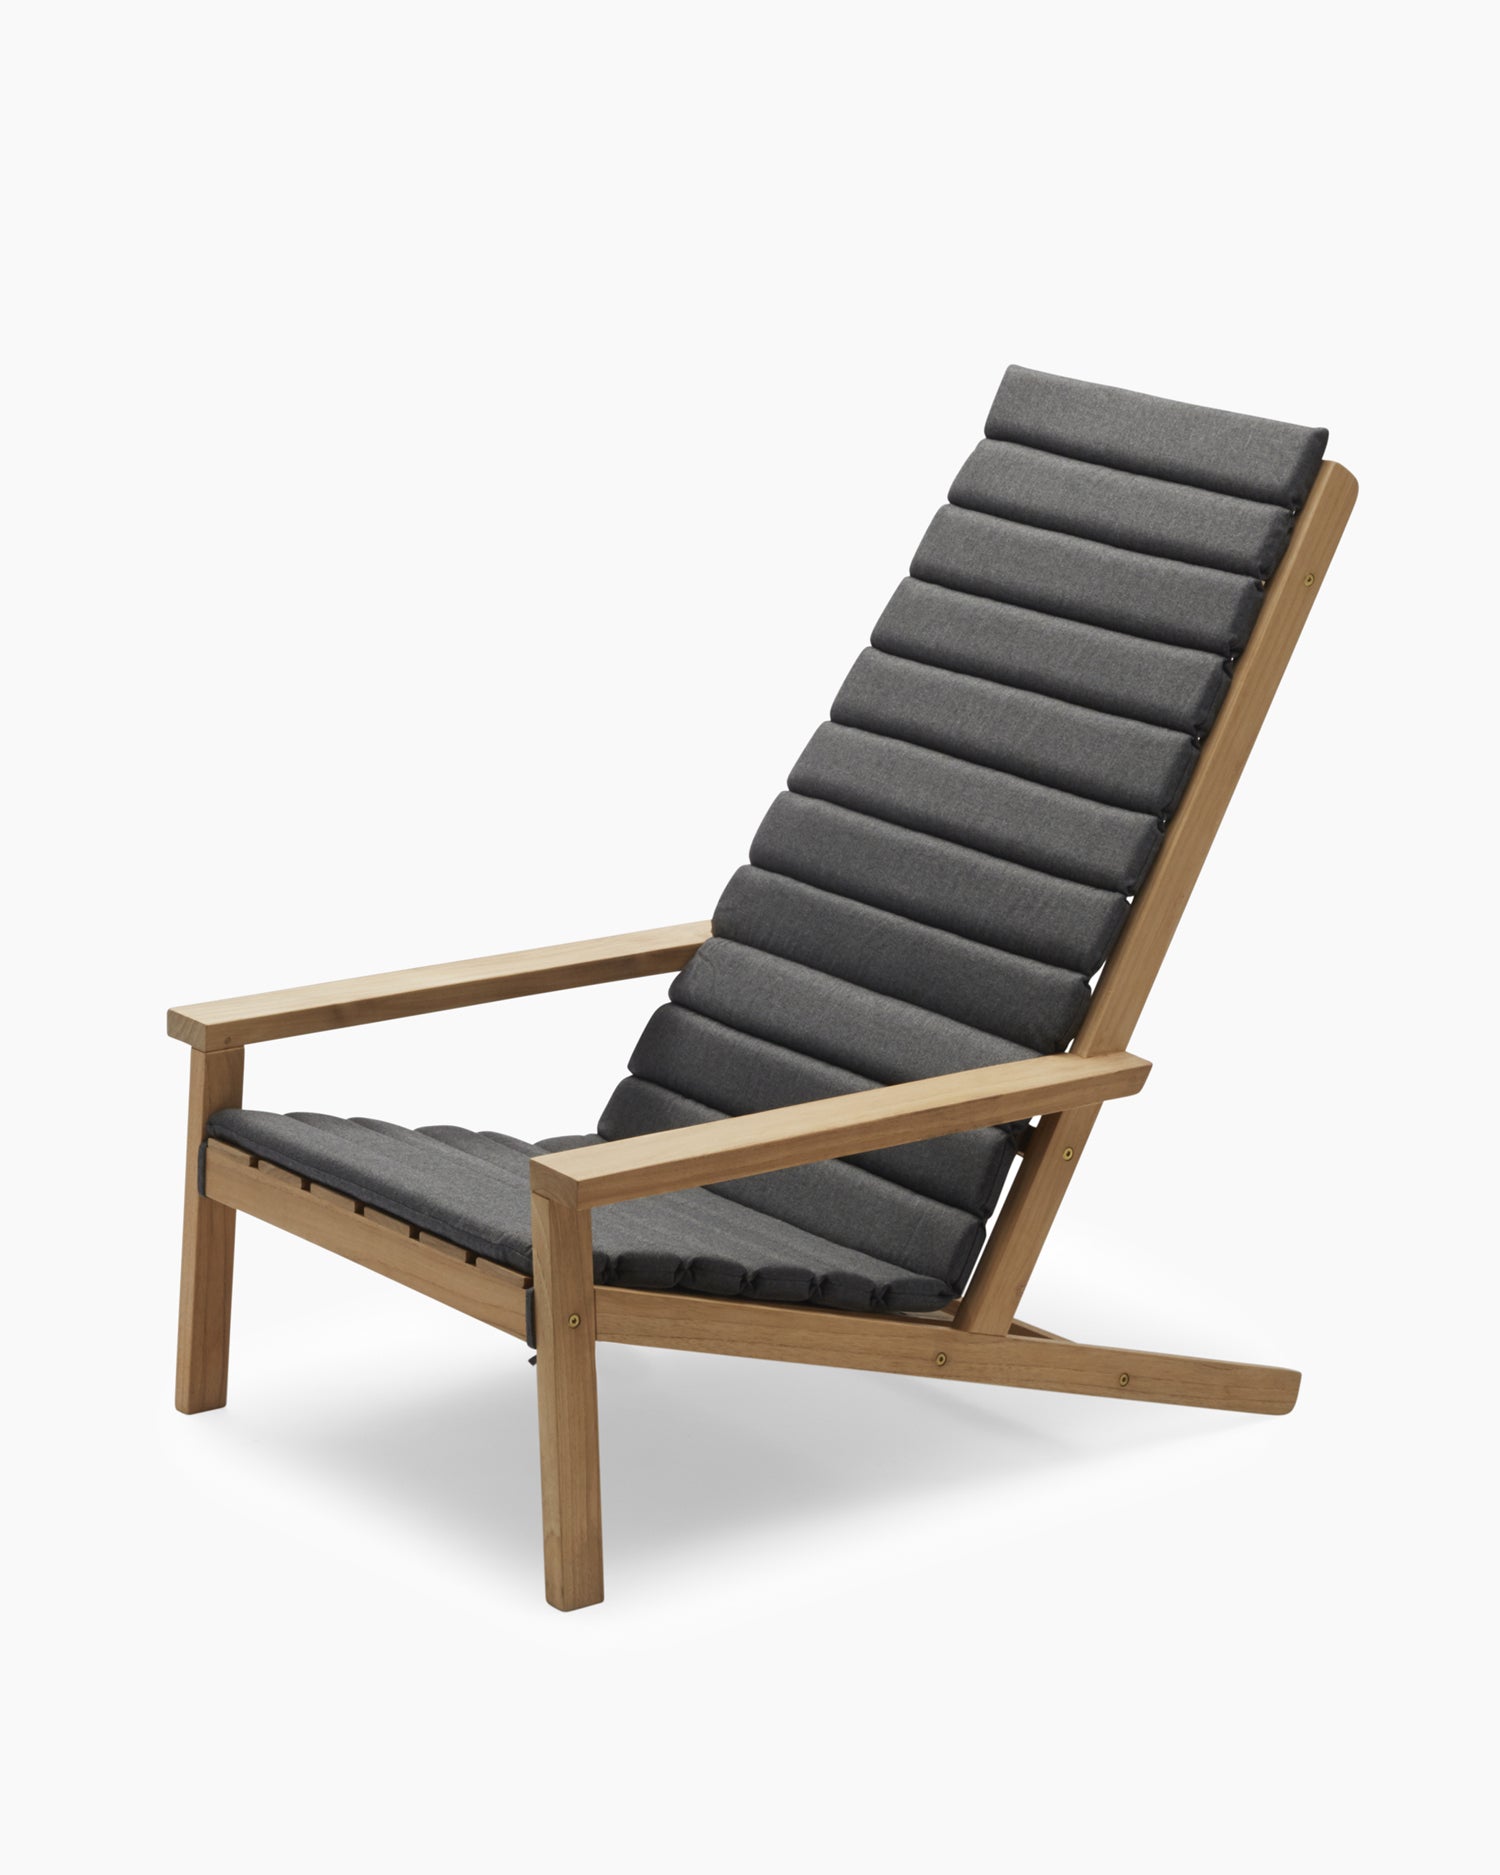 Between Lines Deck Chair Cushion - Charcoal